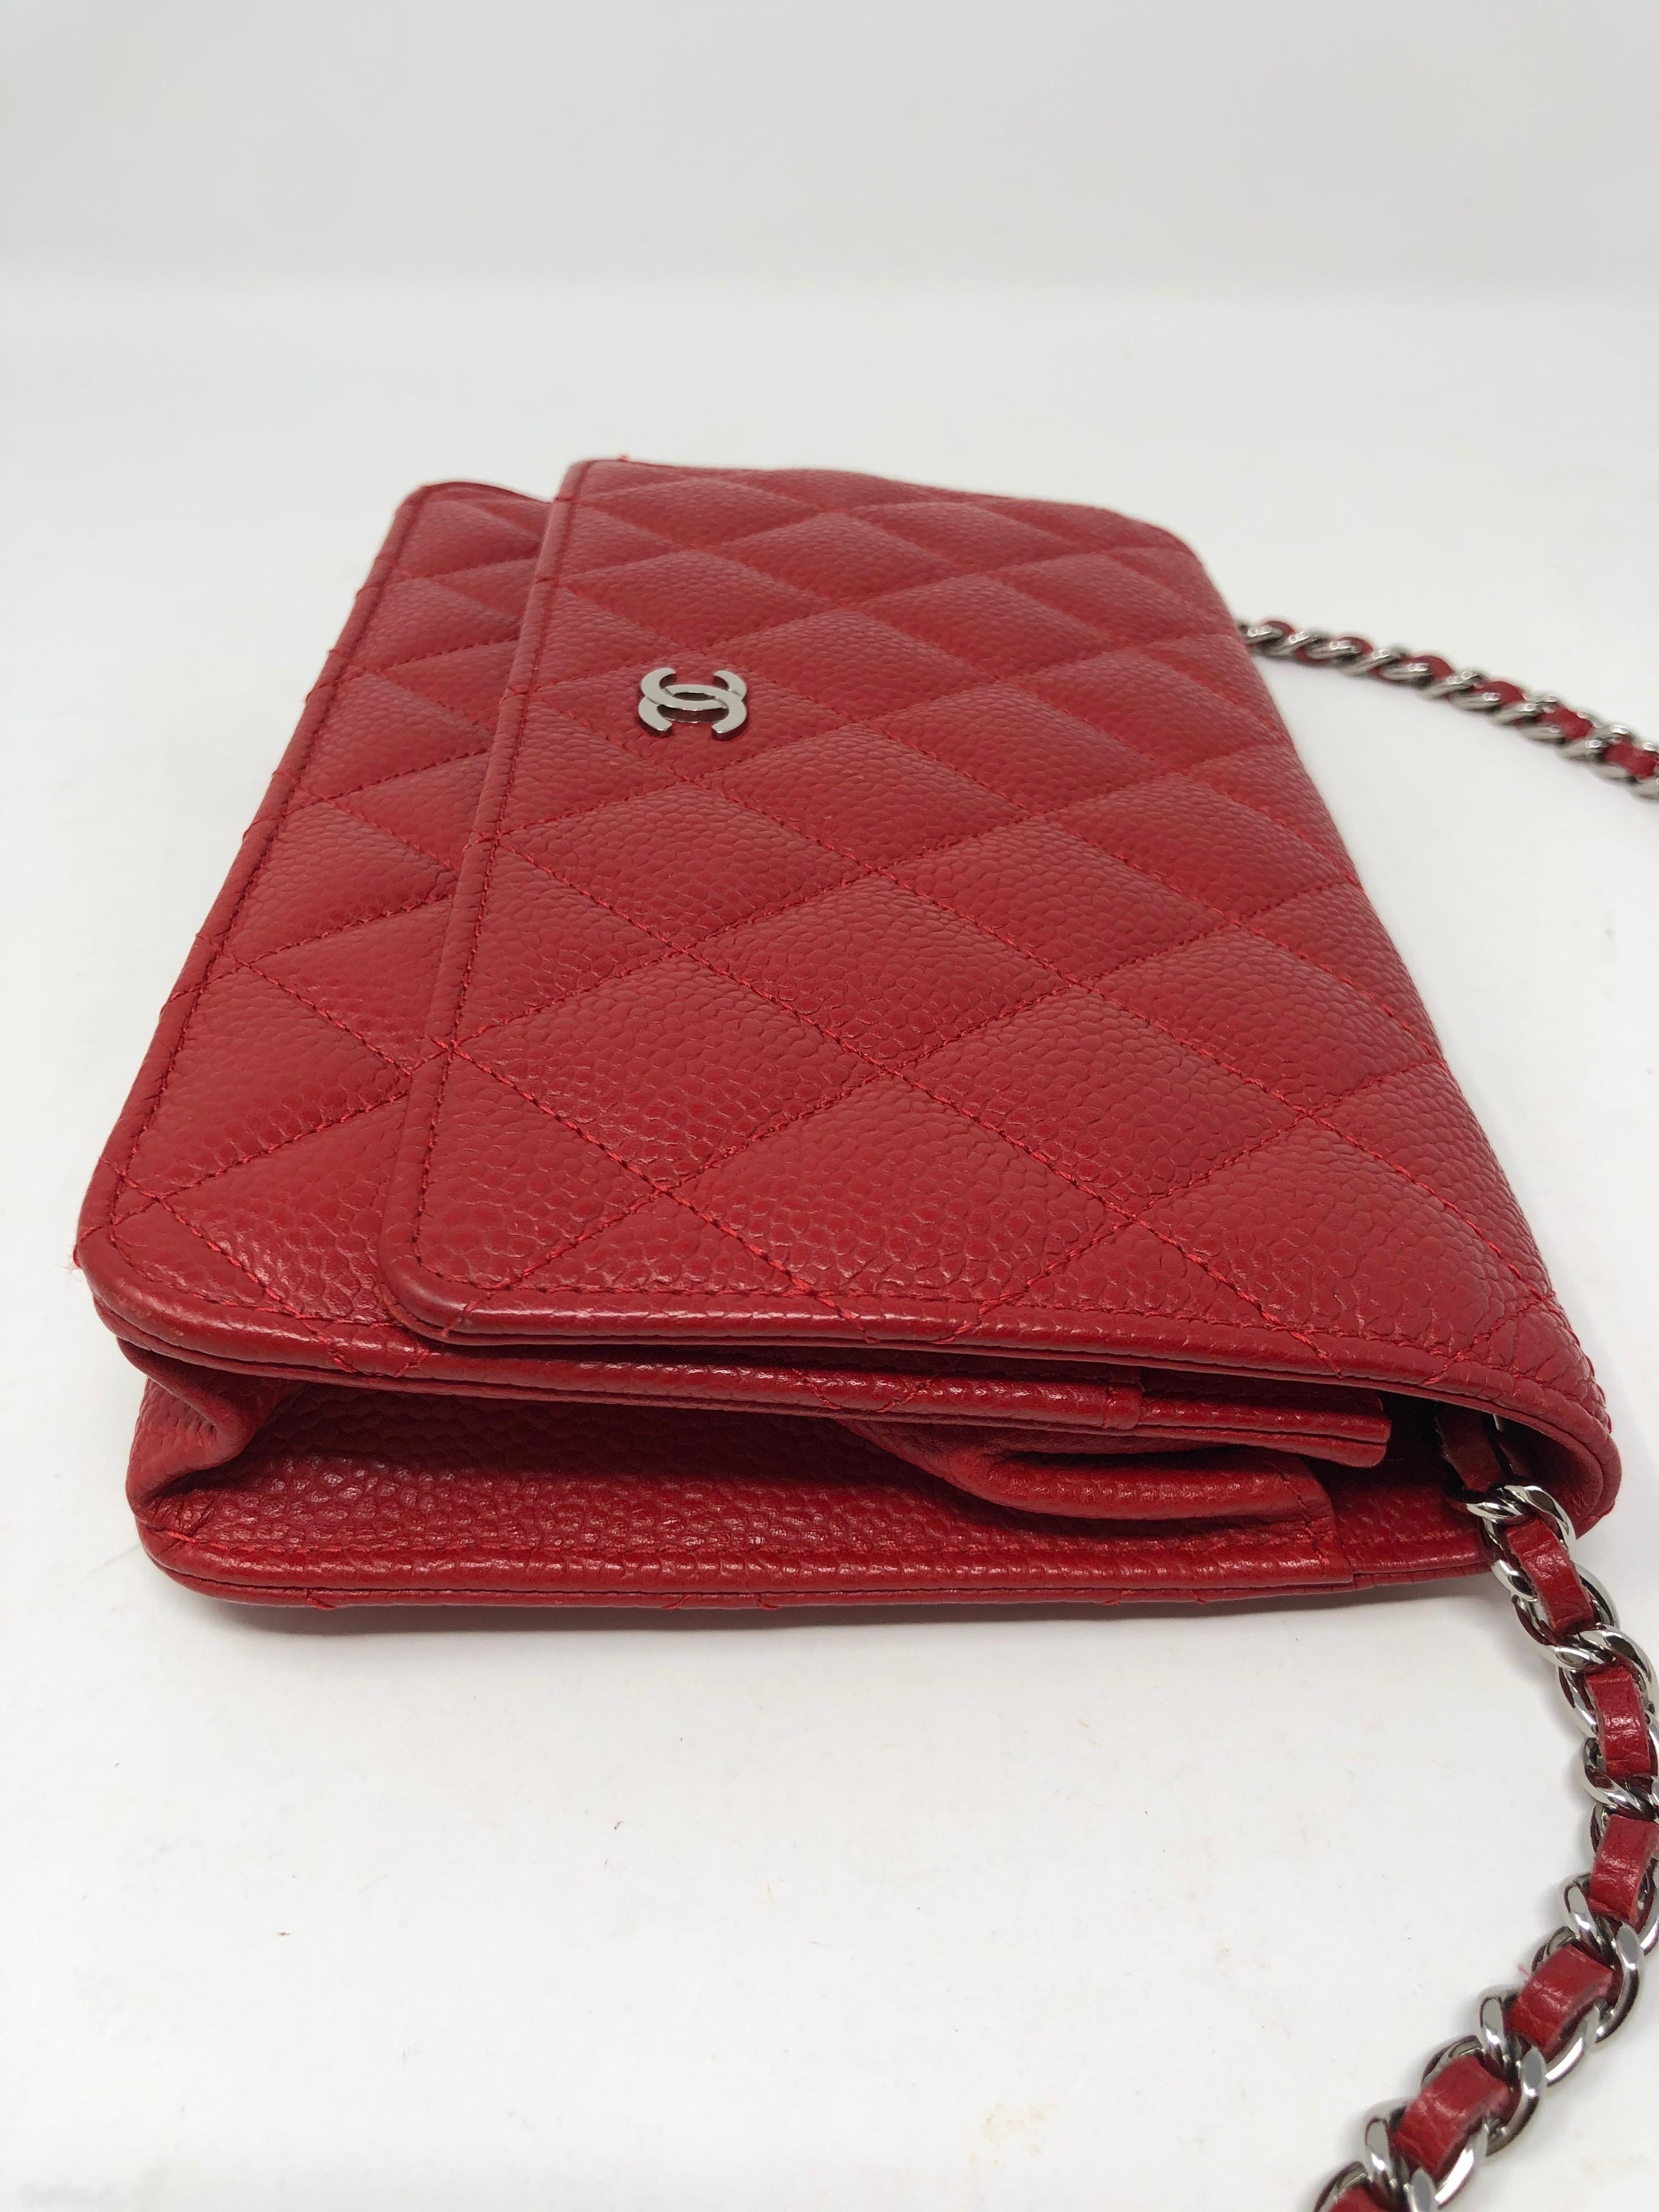 Chanel Red Caviar Wallet On A Chain Bag 2